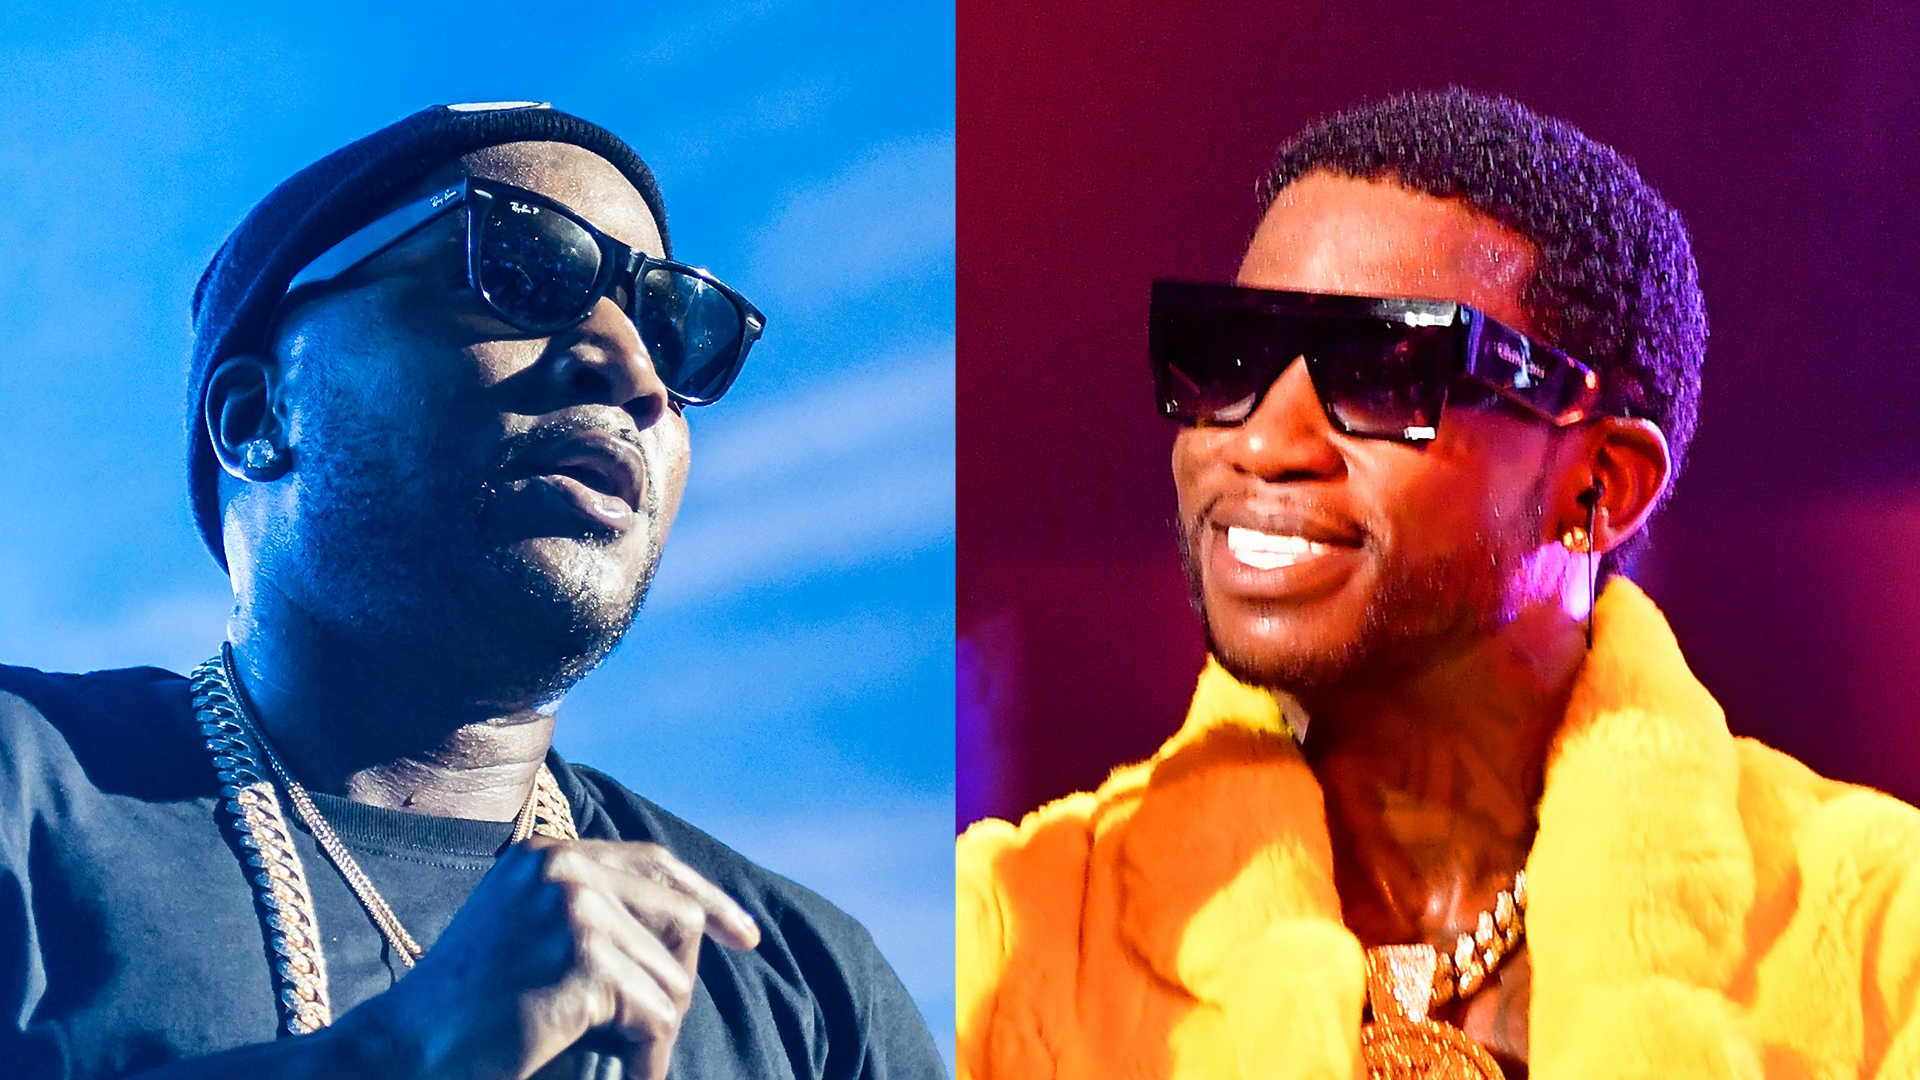 A History of Jeezy and Gucci Mane's Beef   Complex